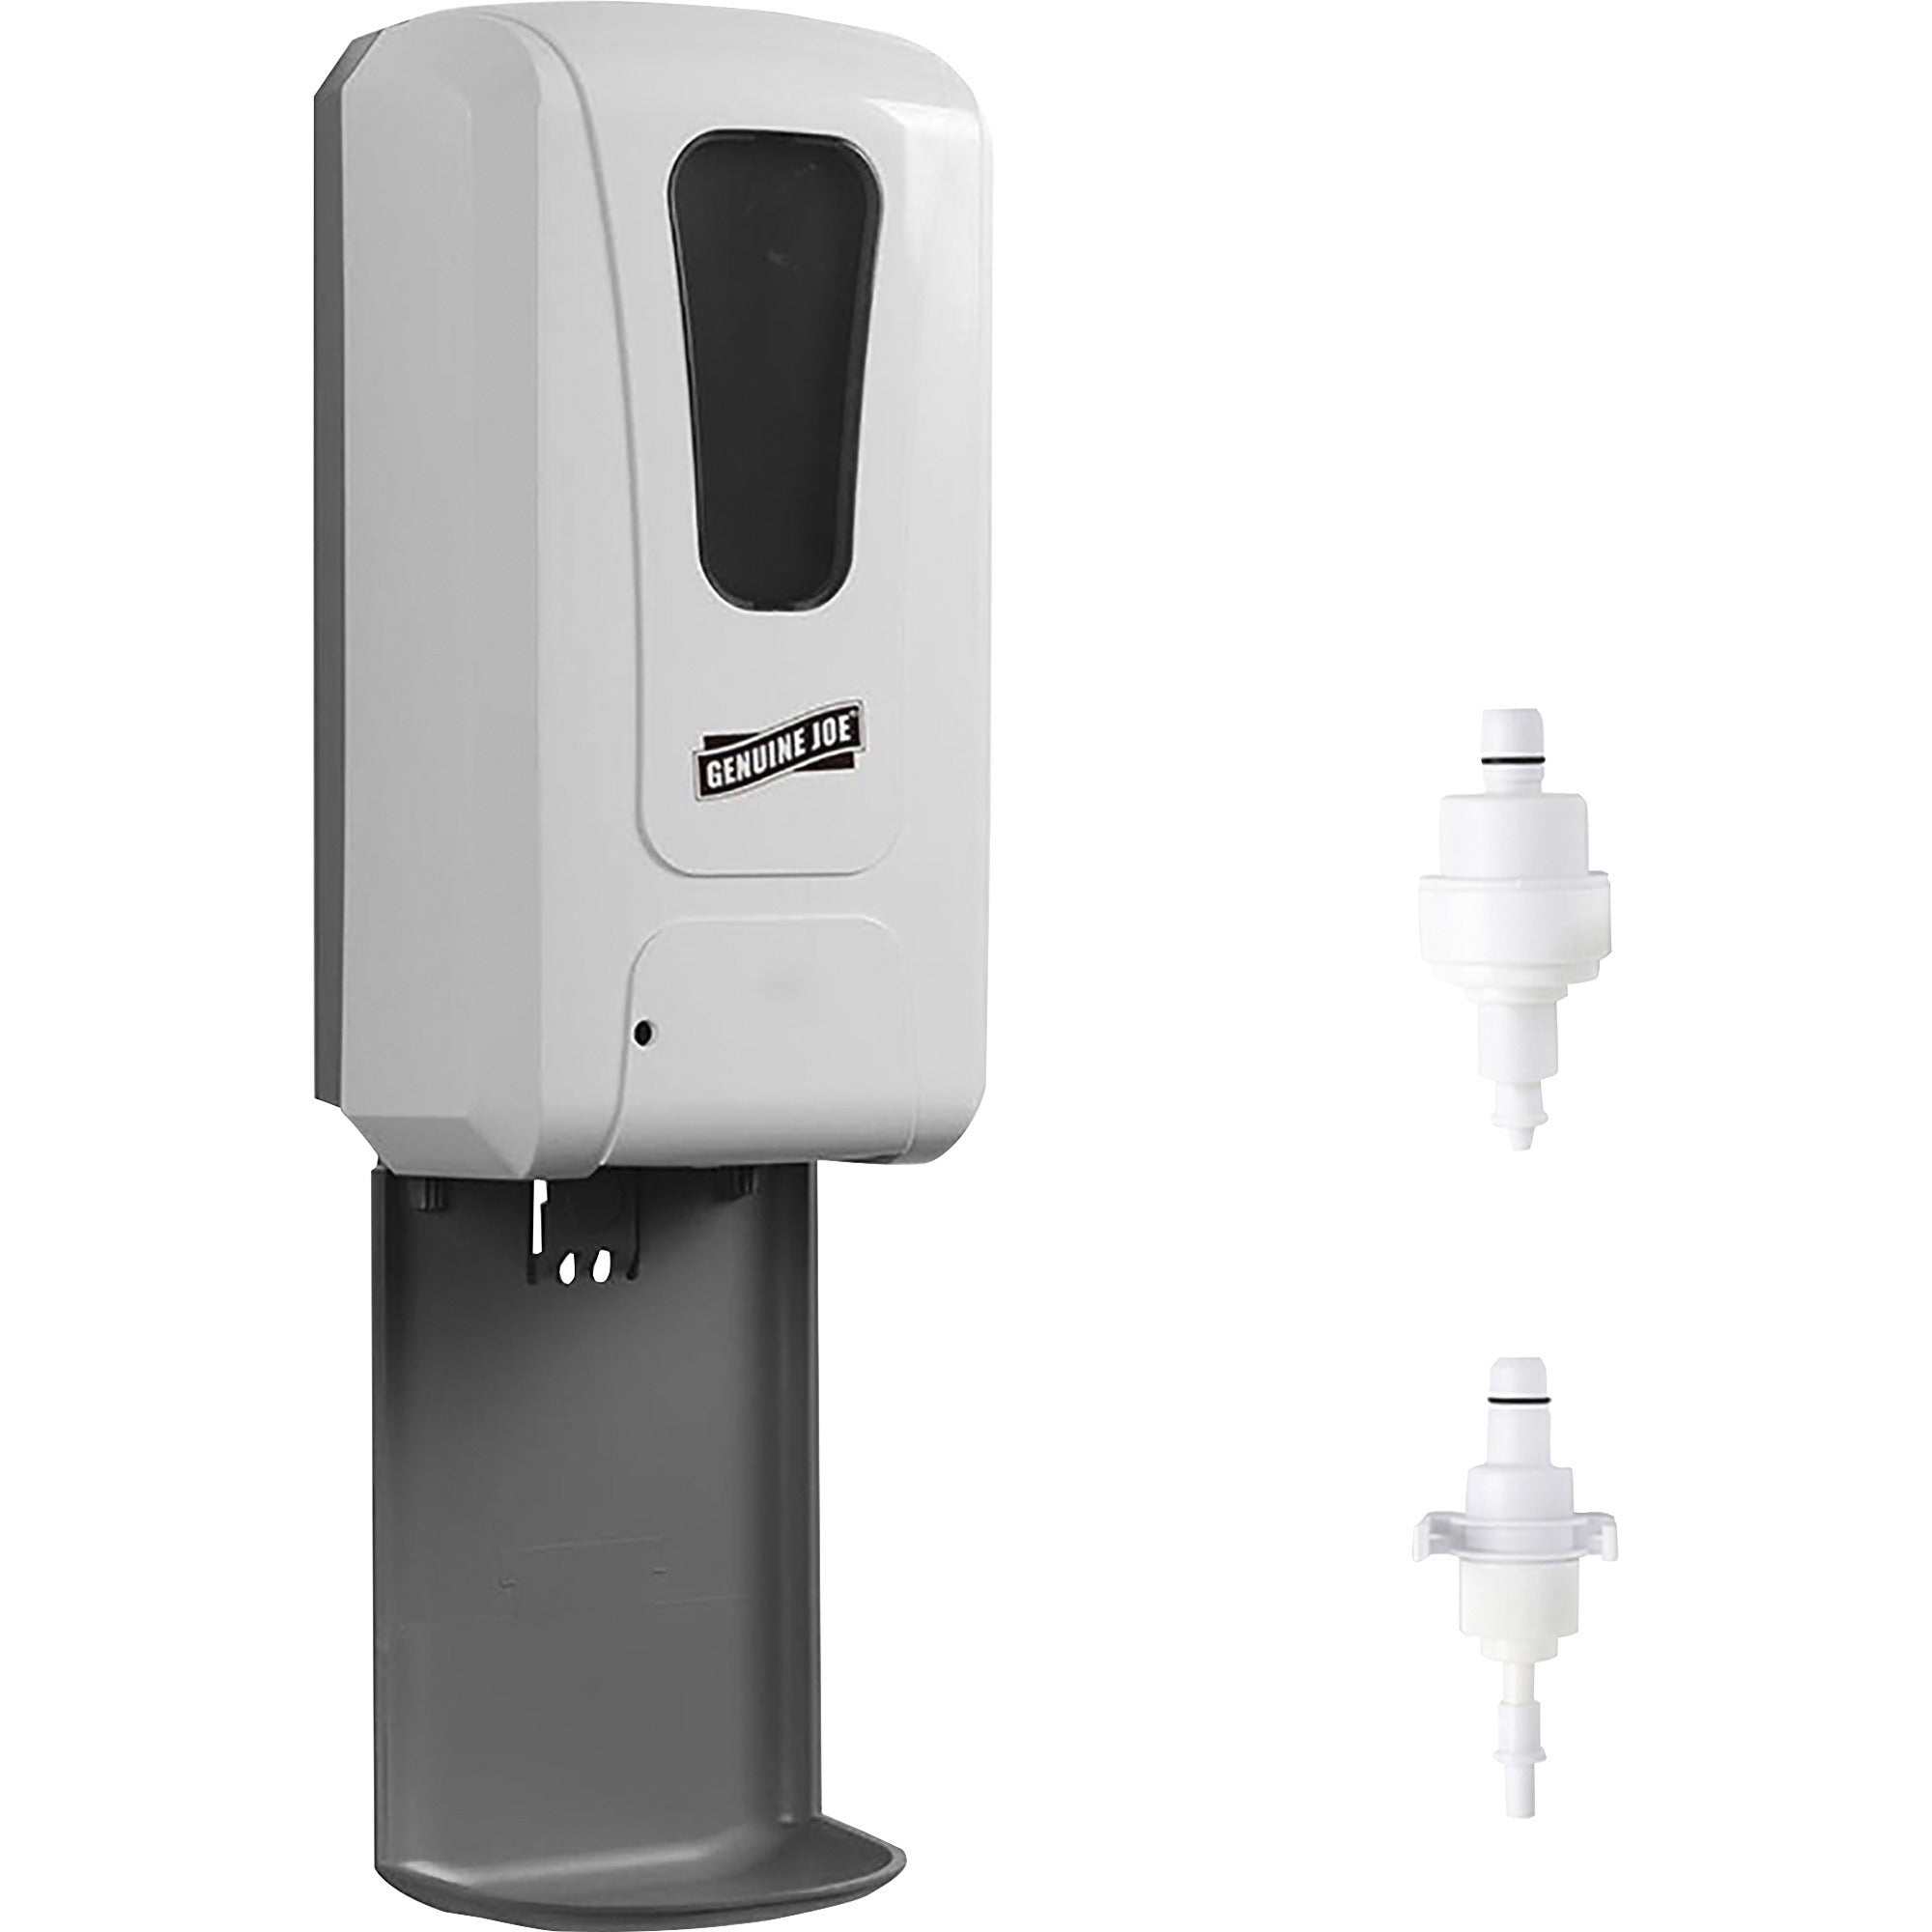 genuine-joe-3-nozzle-touch-free-dispenser-automatic-106-quart-capacity-support-4-x-c-battery-touch-free-lockable-level-indicator-site-window-drip-free-refillable-white-1each_gjo01404 - 2